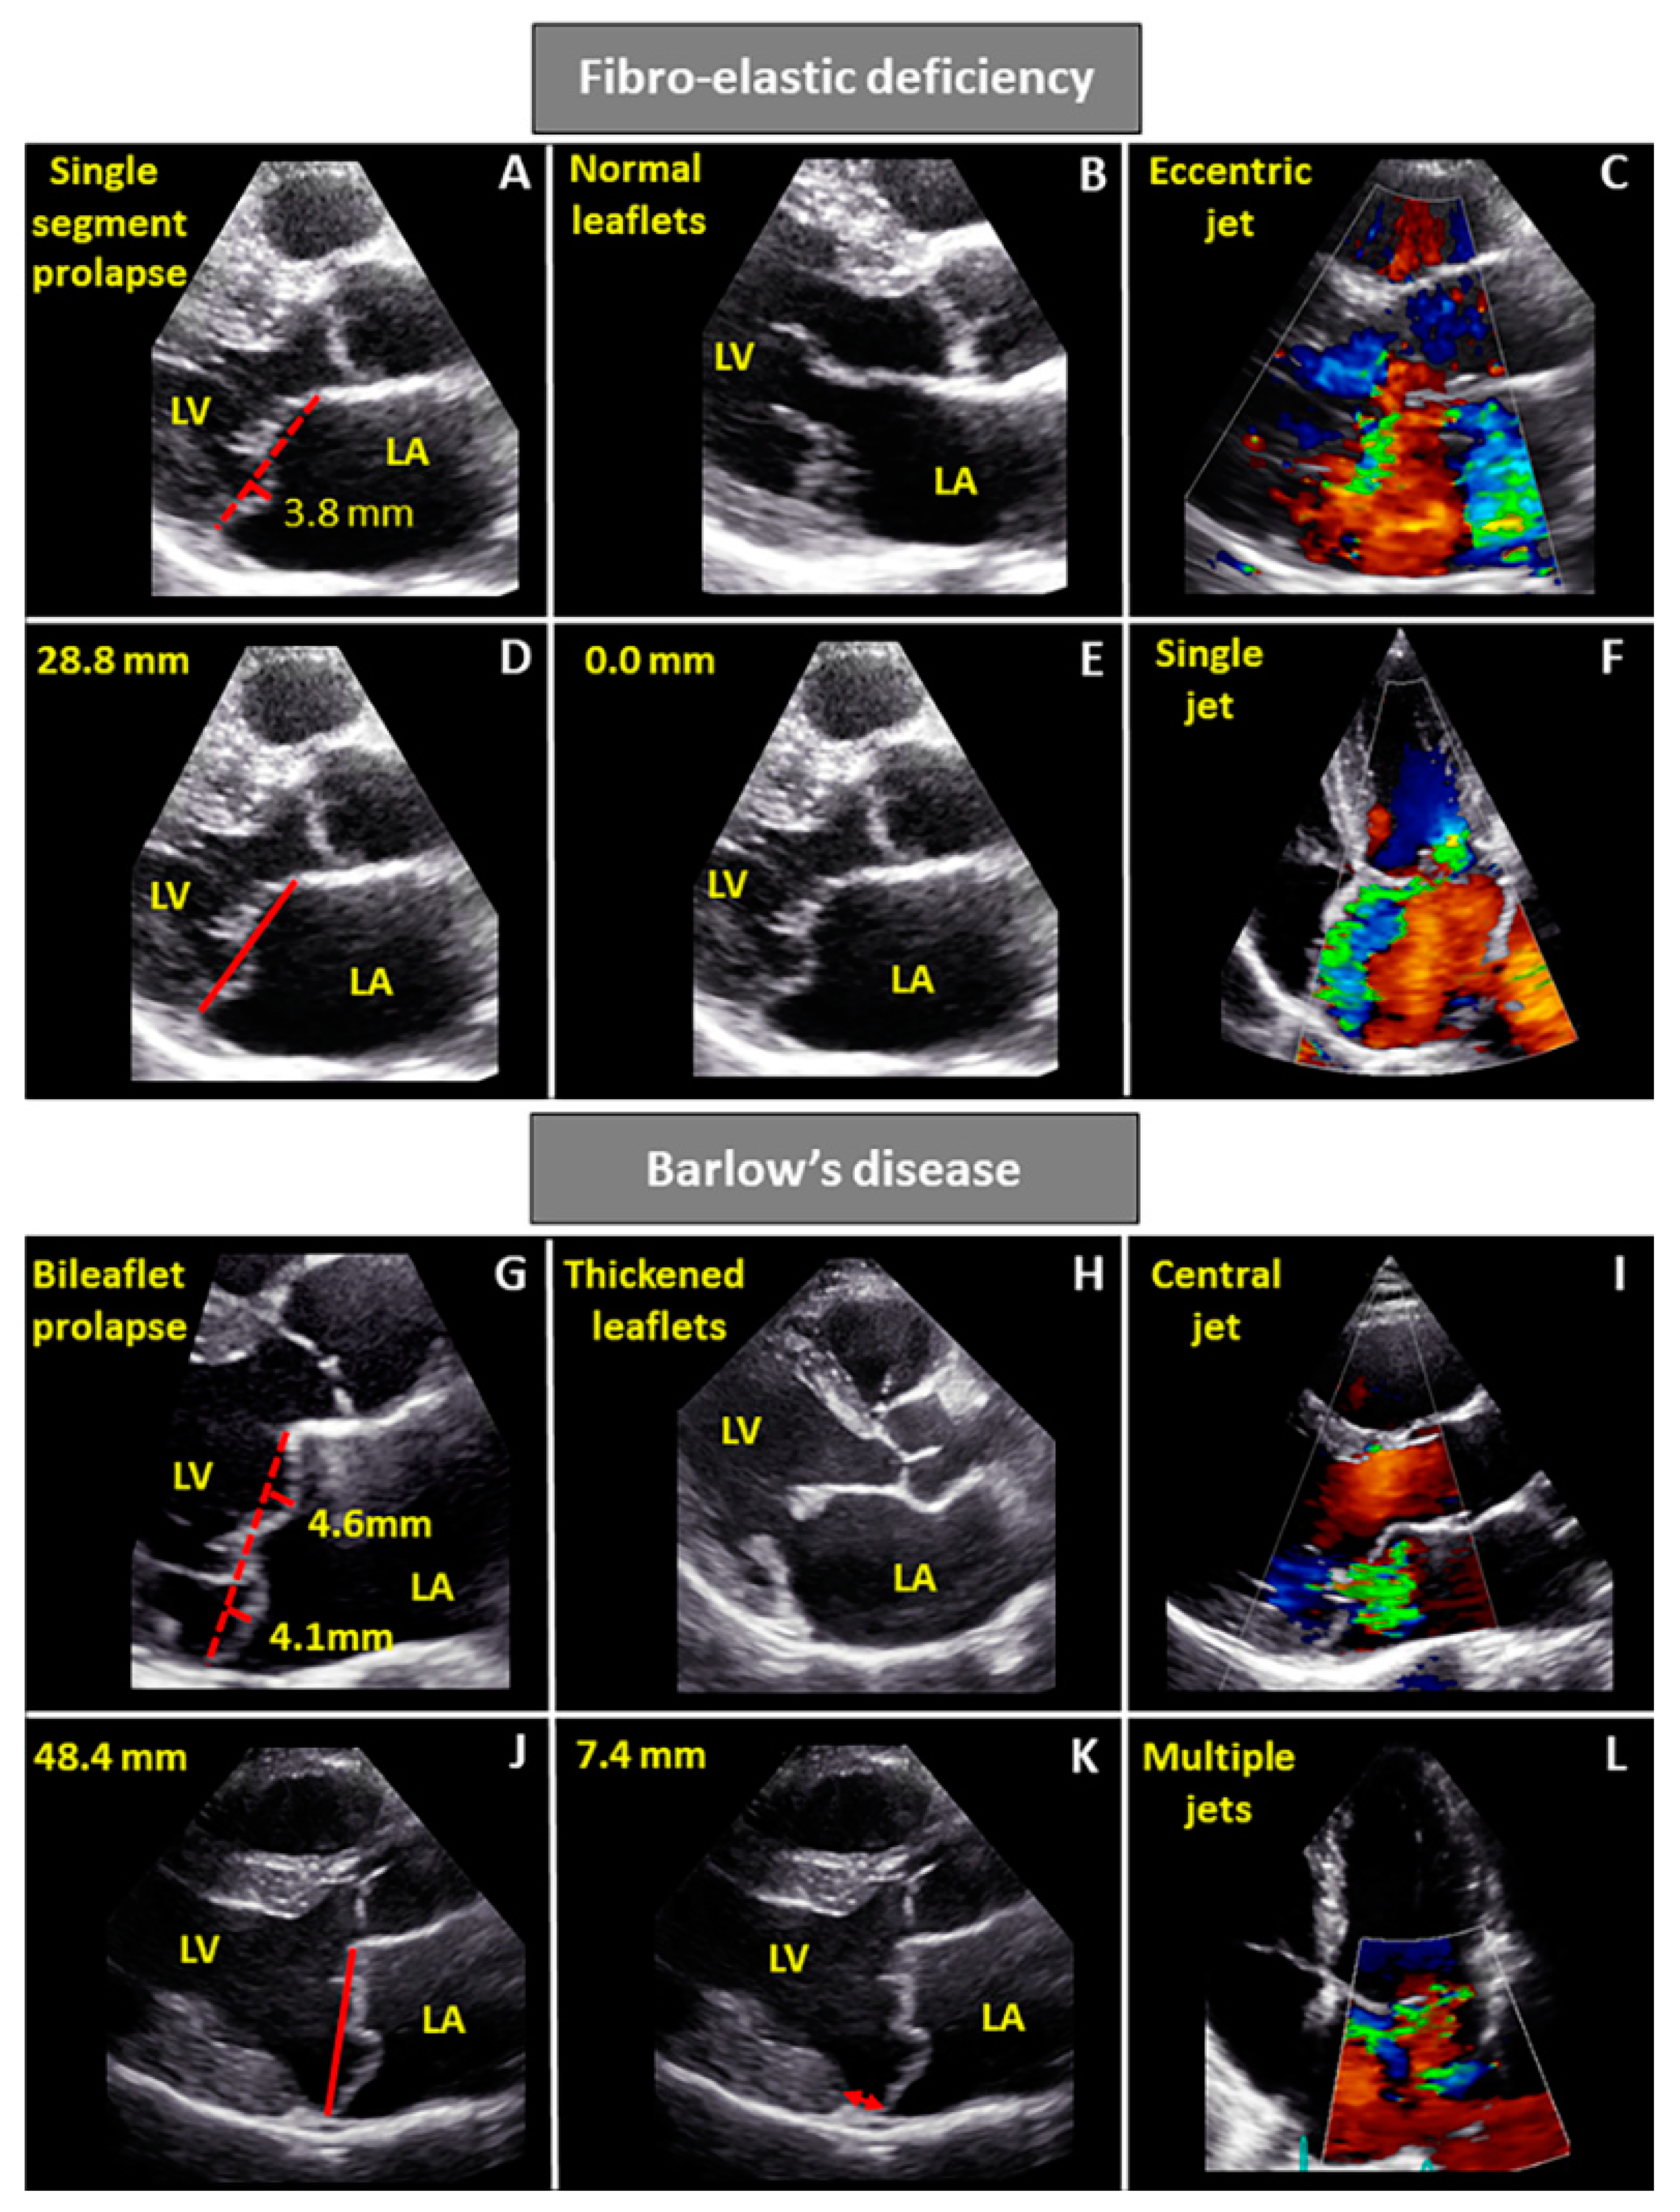 JCDD | Free Full-Text | Characterization of Degenerative Mitral Valve  Disease: Differences between Fibroelastic Deficiency and Barlow's Disease